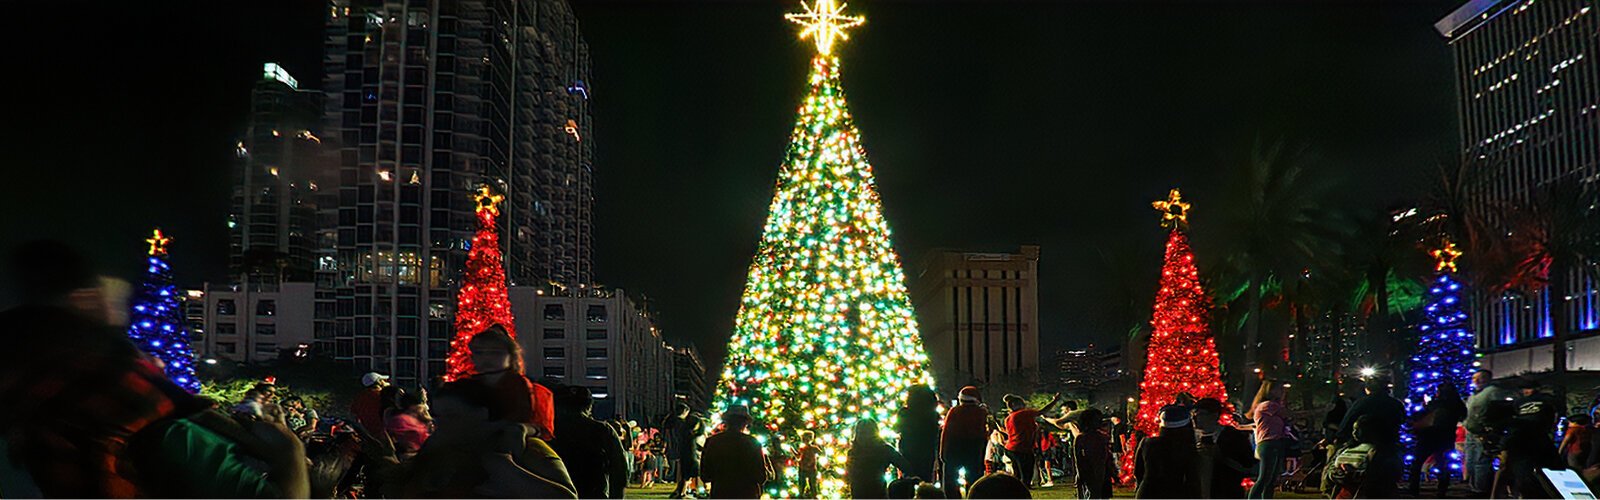 The lighting of a 35-foot-tall LED-lighted Christmas tree and six smaller trees attracts a big crowd around the Christmas display.